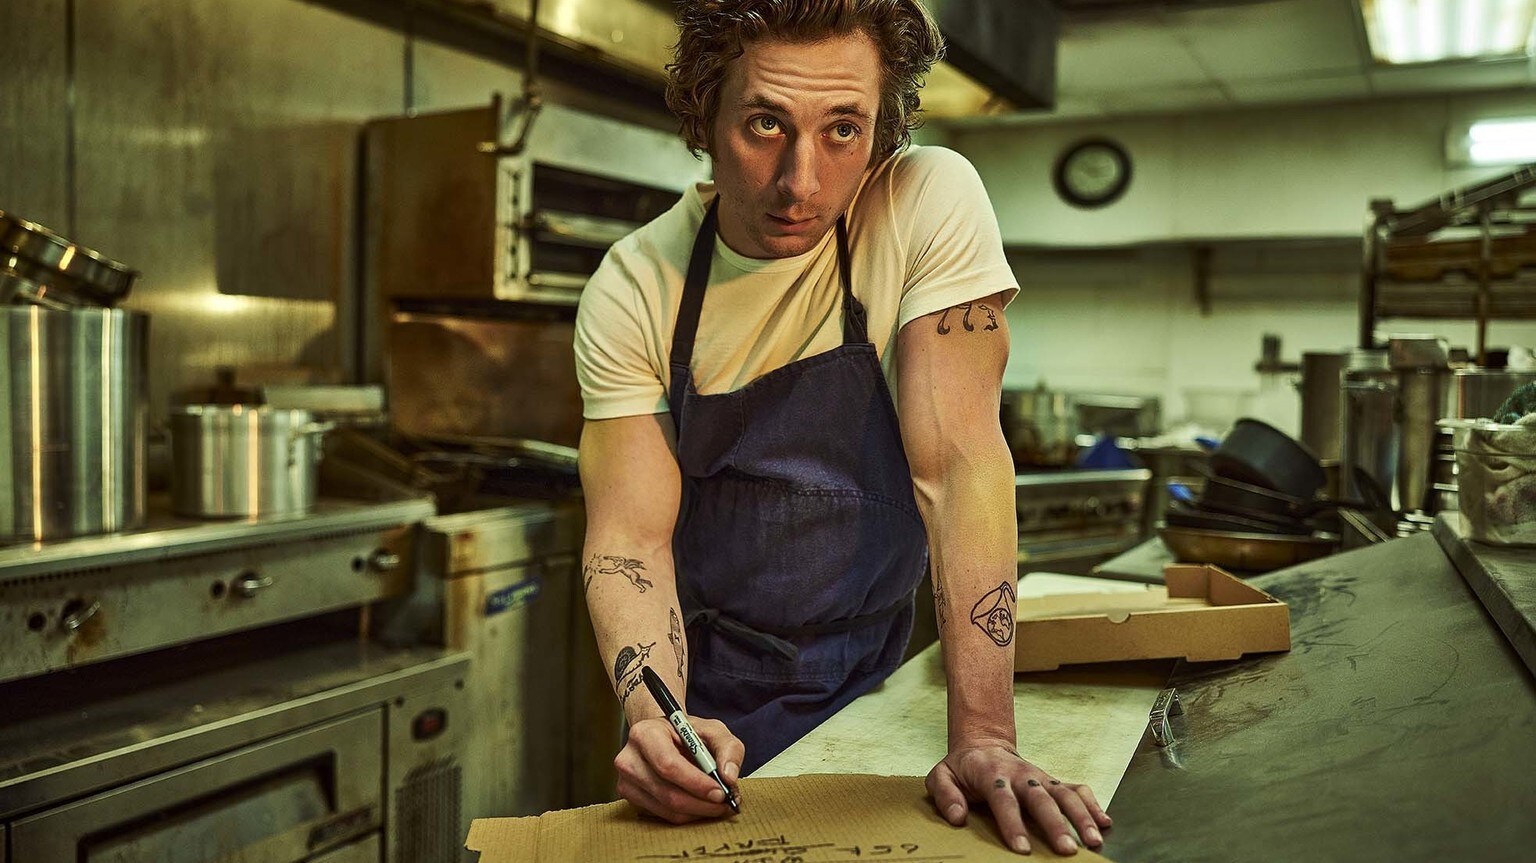 Jeremy Allen White as Carmen, standing in a kitchen writing on a piece of paper